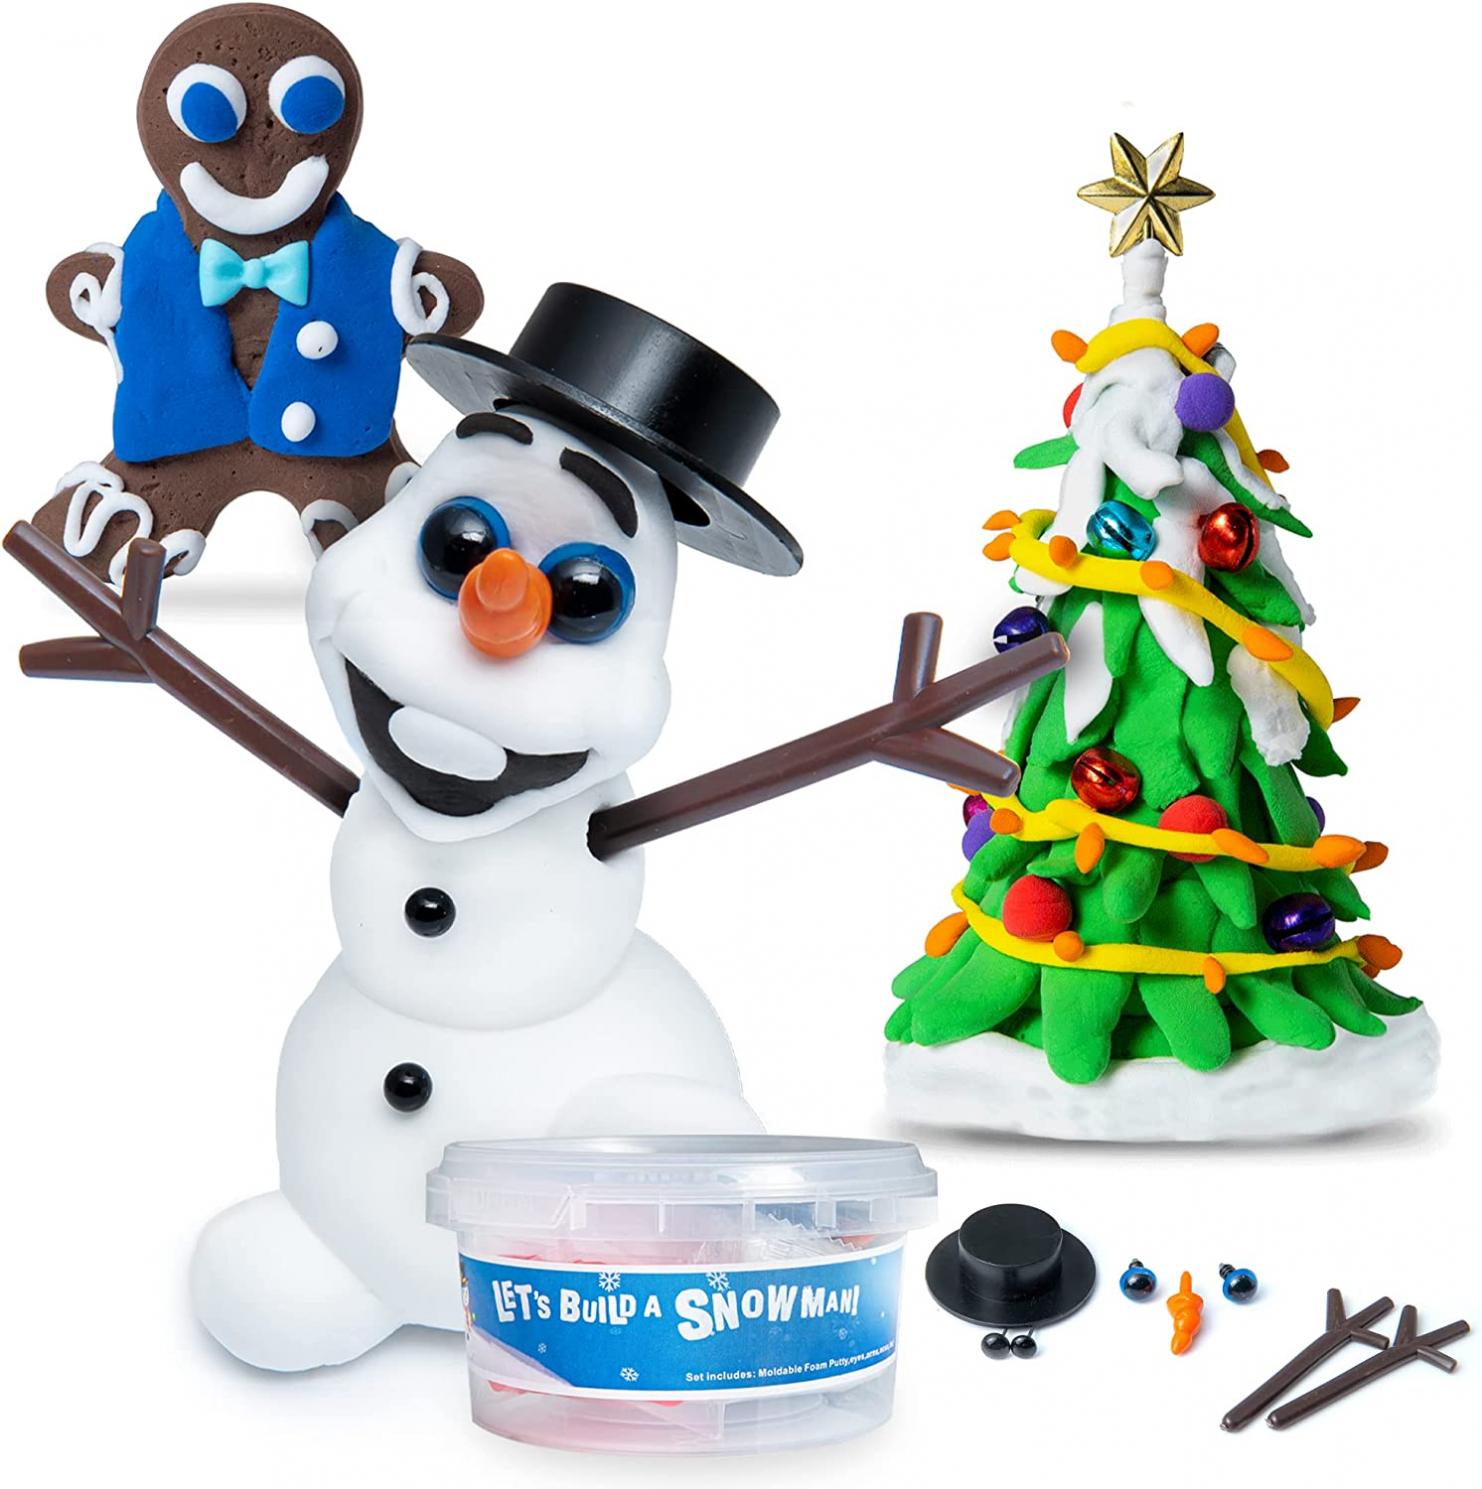 Let's Build A Snowman, Gingerbread Man, & Christmas Tree (3 Piece Kit), Boys and Girls Christmas Stocking Stuffers for Kids; Make Snowman Crafts, Ornaments, Kids Gifts for Xmas, Figurines (Clay/Putty)